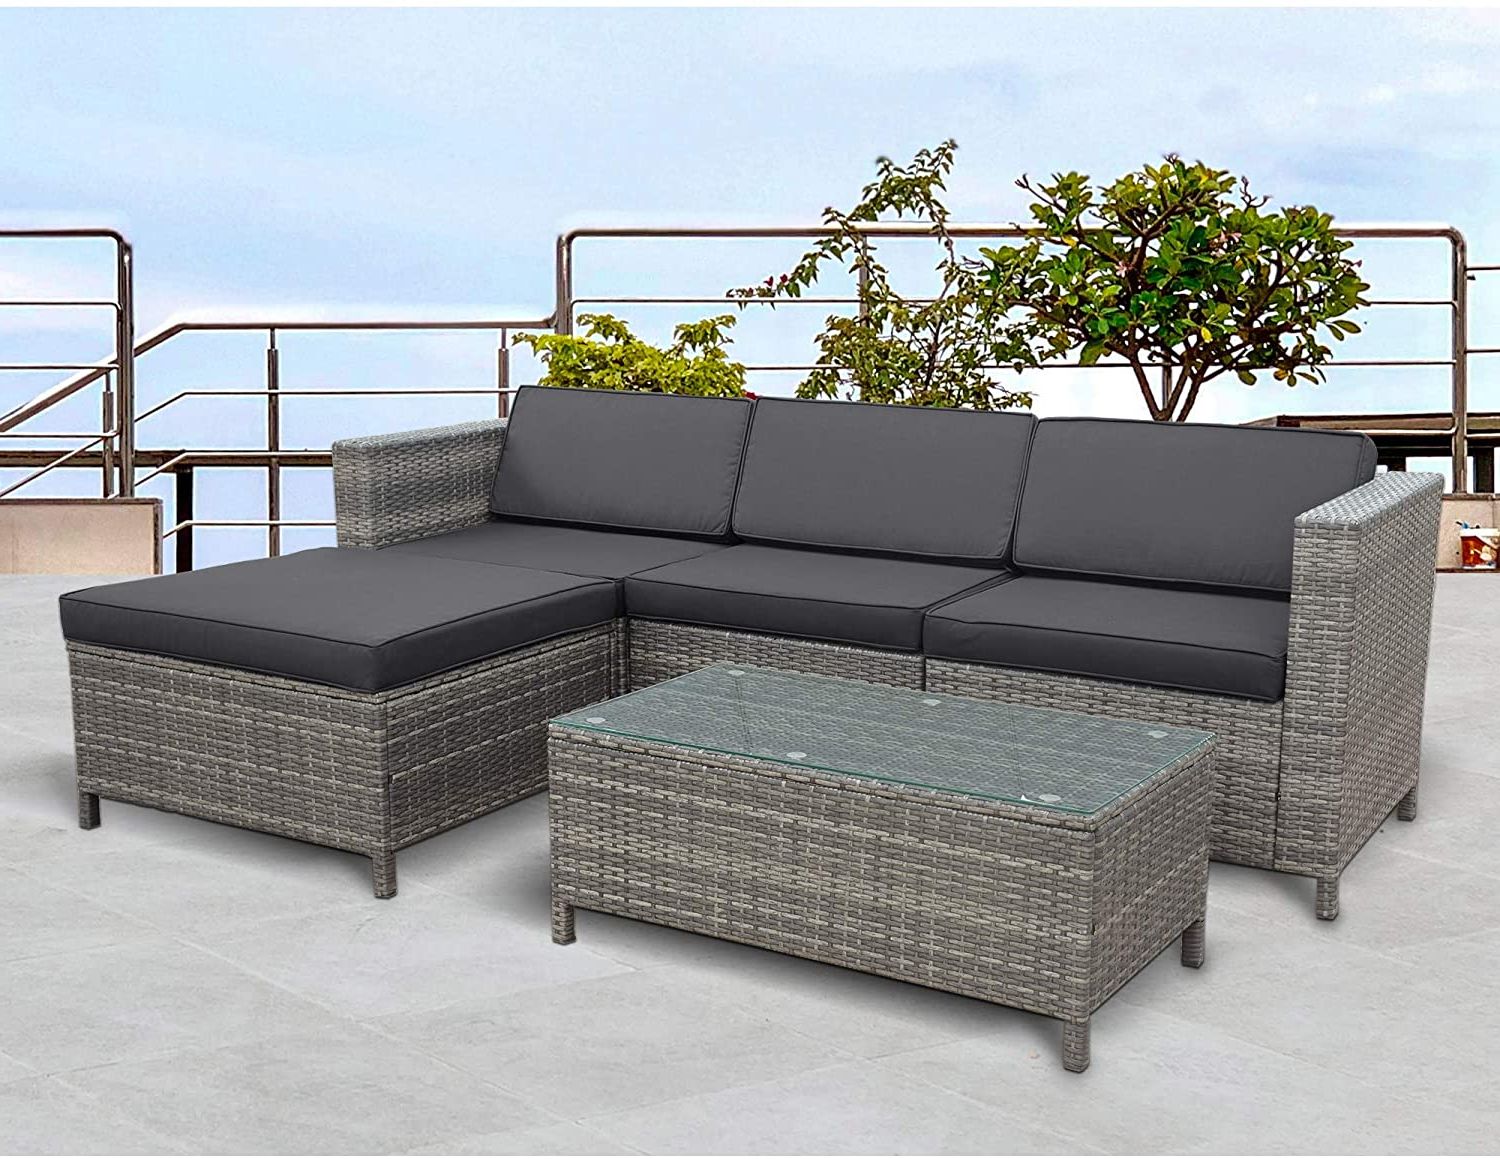 Famous Outdoor Wicker Gray Cushion Patio Sets In 5 Piece Outdoor Patio Furniture Set, All Weather Wicker Rattan (View 1 of 15)